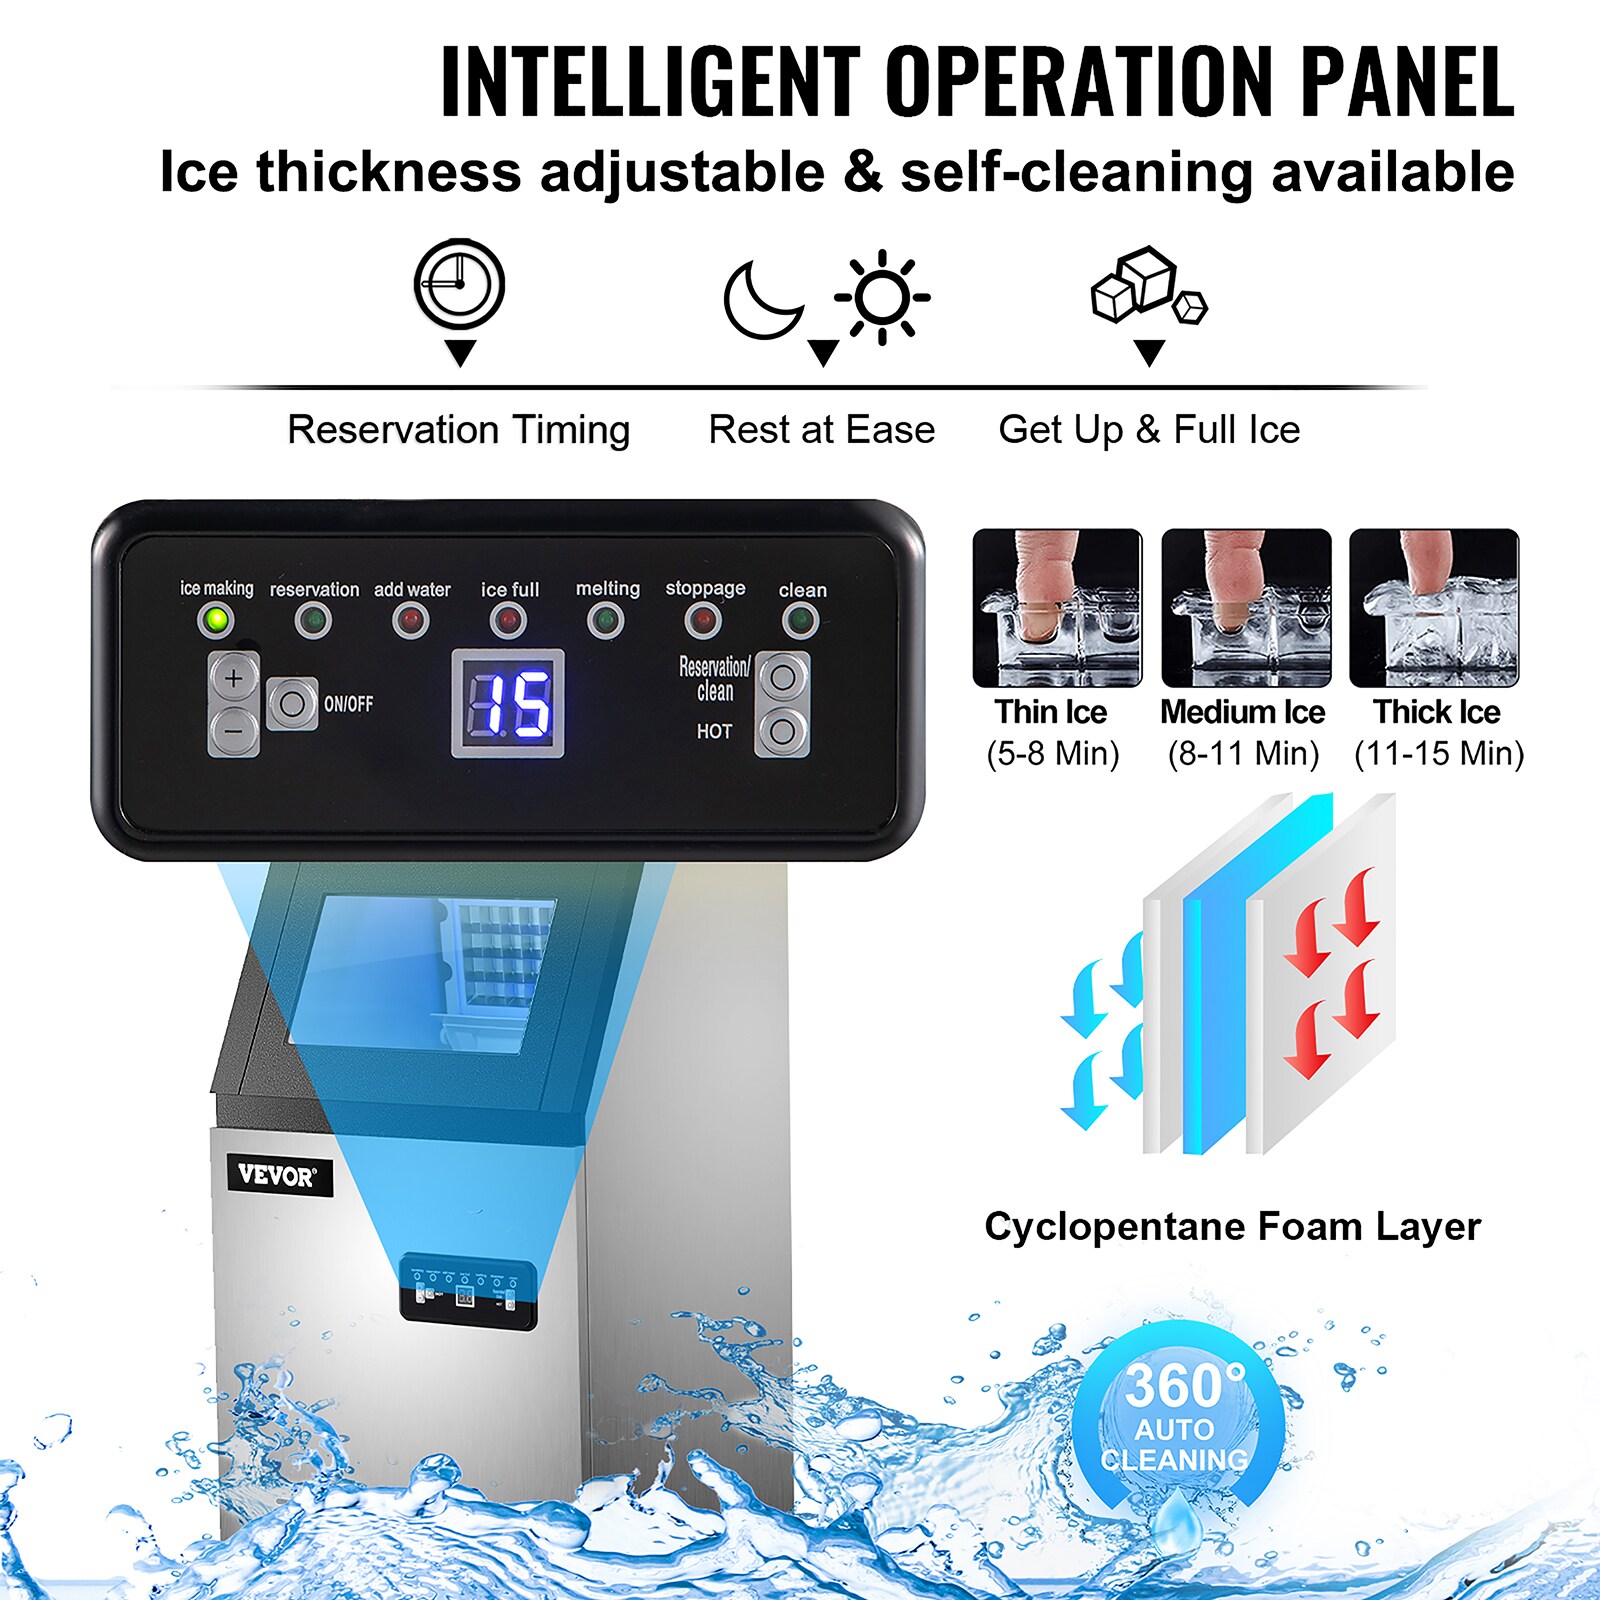 How Long Does It Take an Ice Maker to Fill? - Aviv Service Today